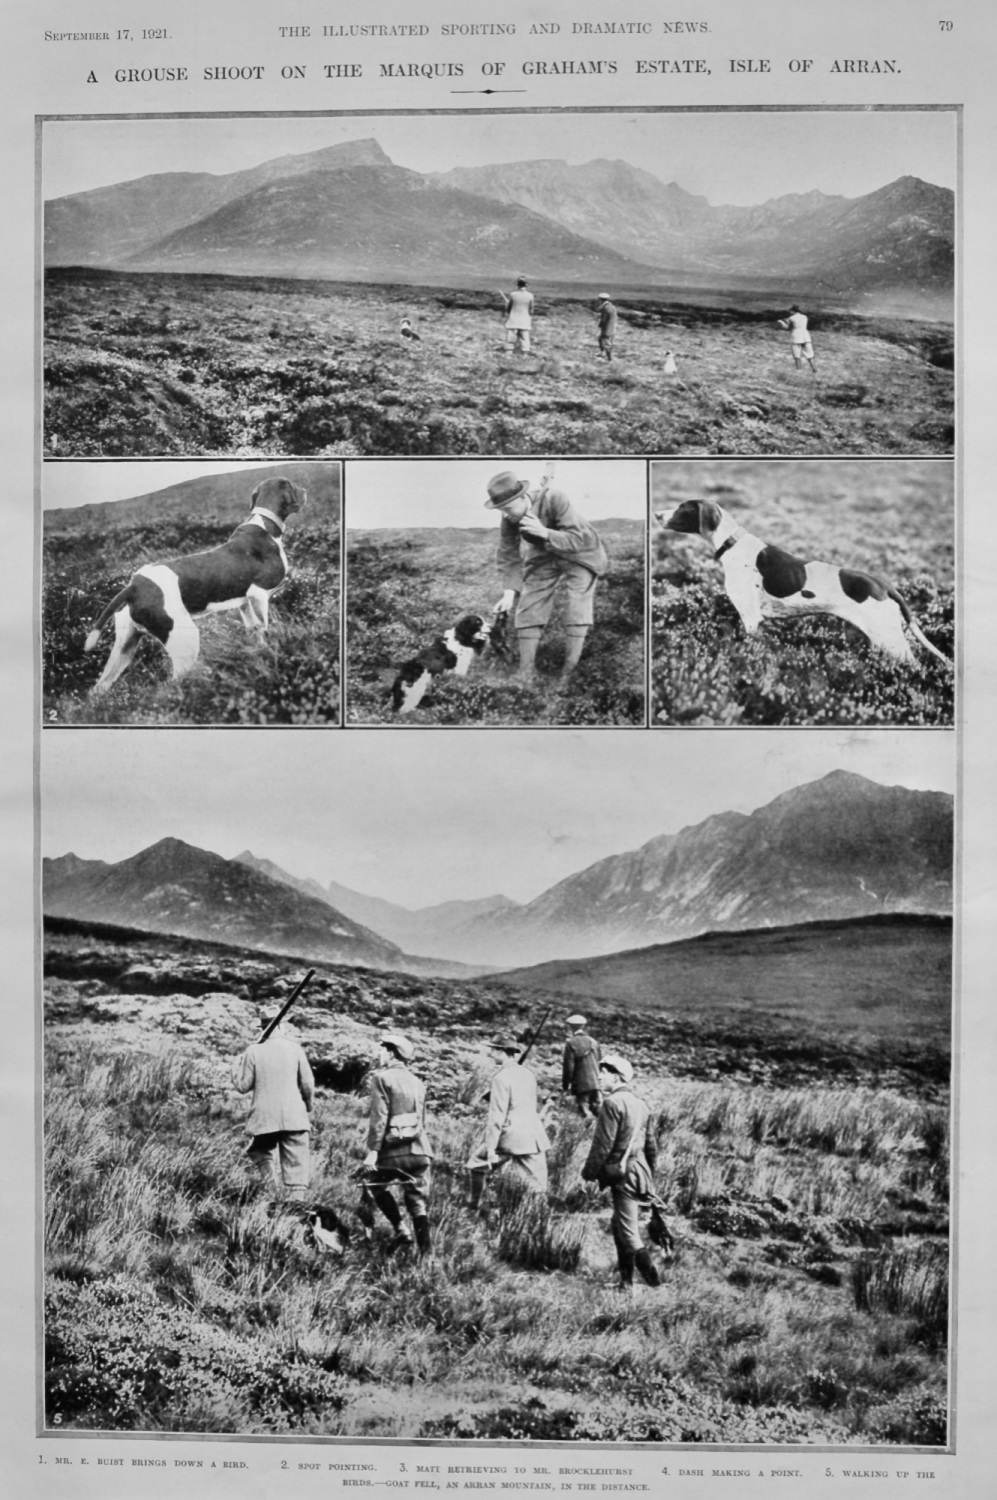 A Grouse Shoot on the Marquis of Graham's Estate, Isle of Arran.  1921.